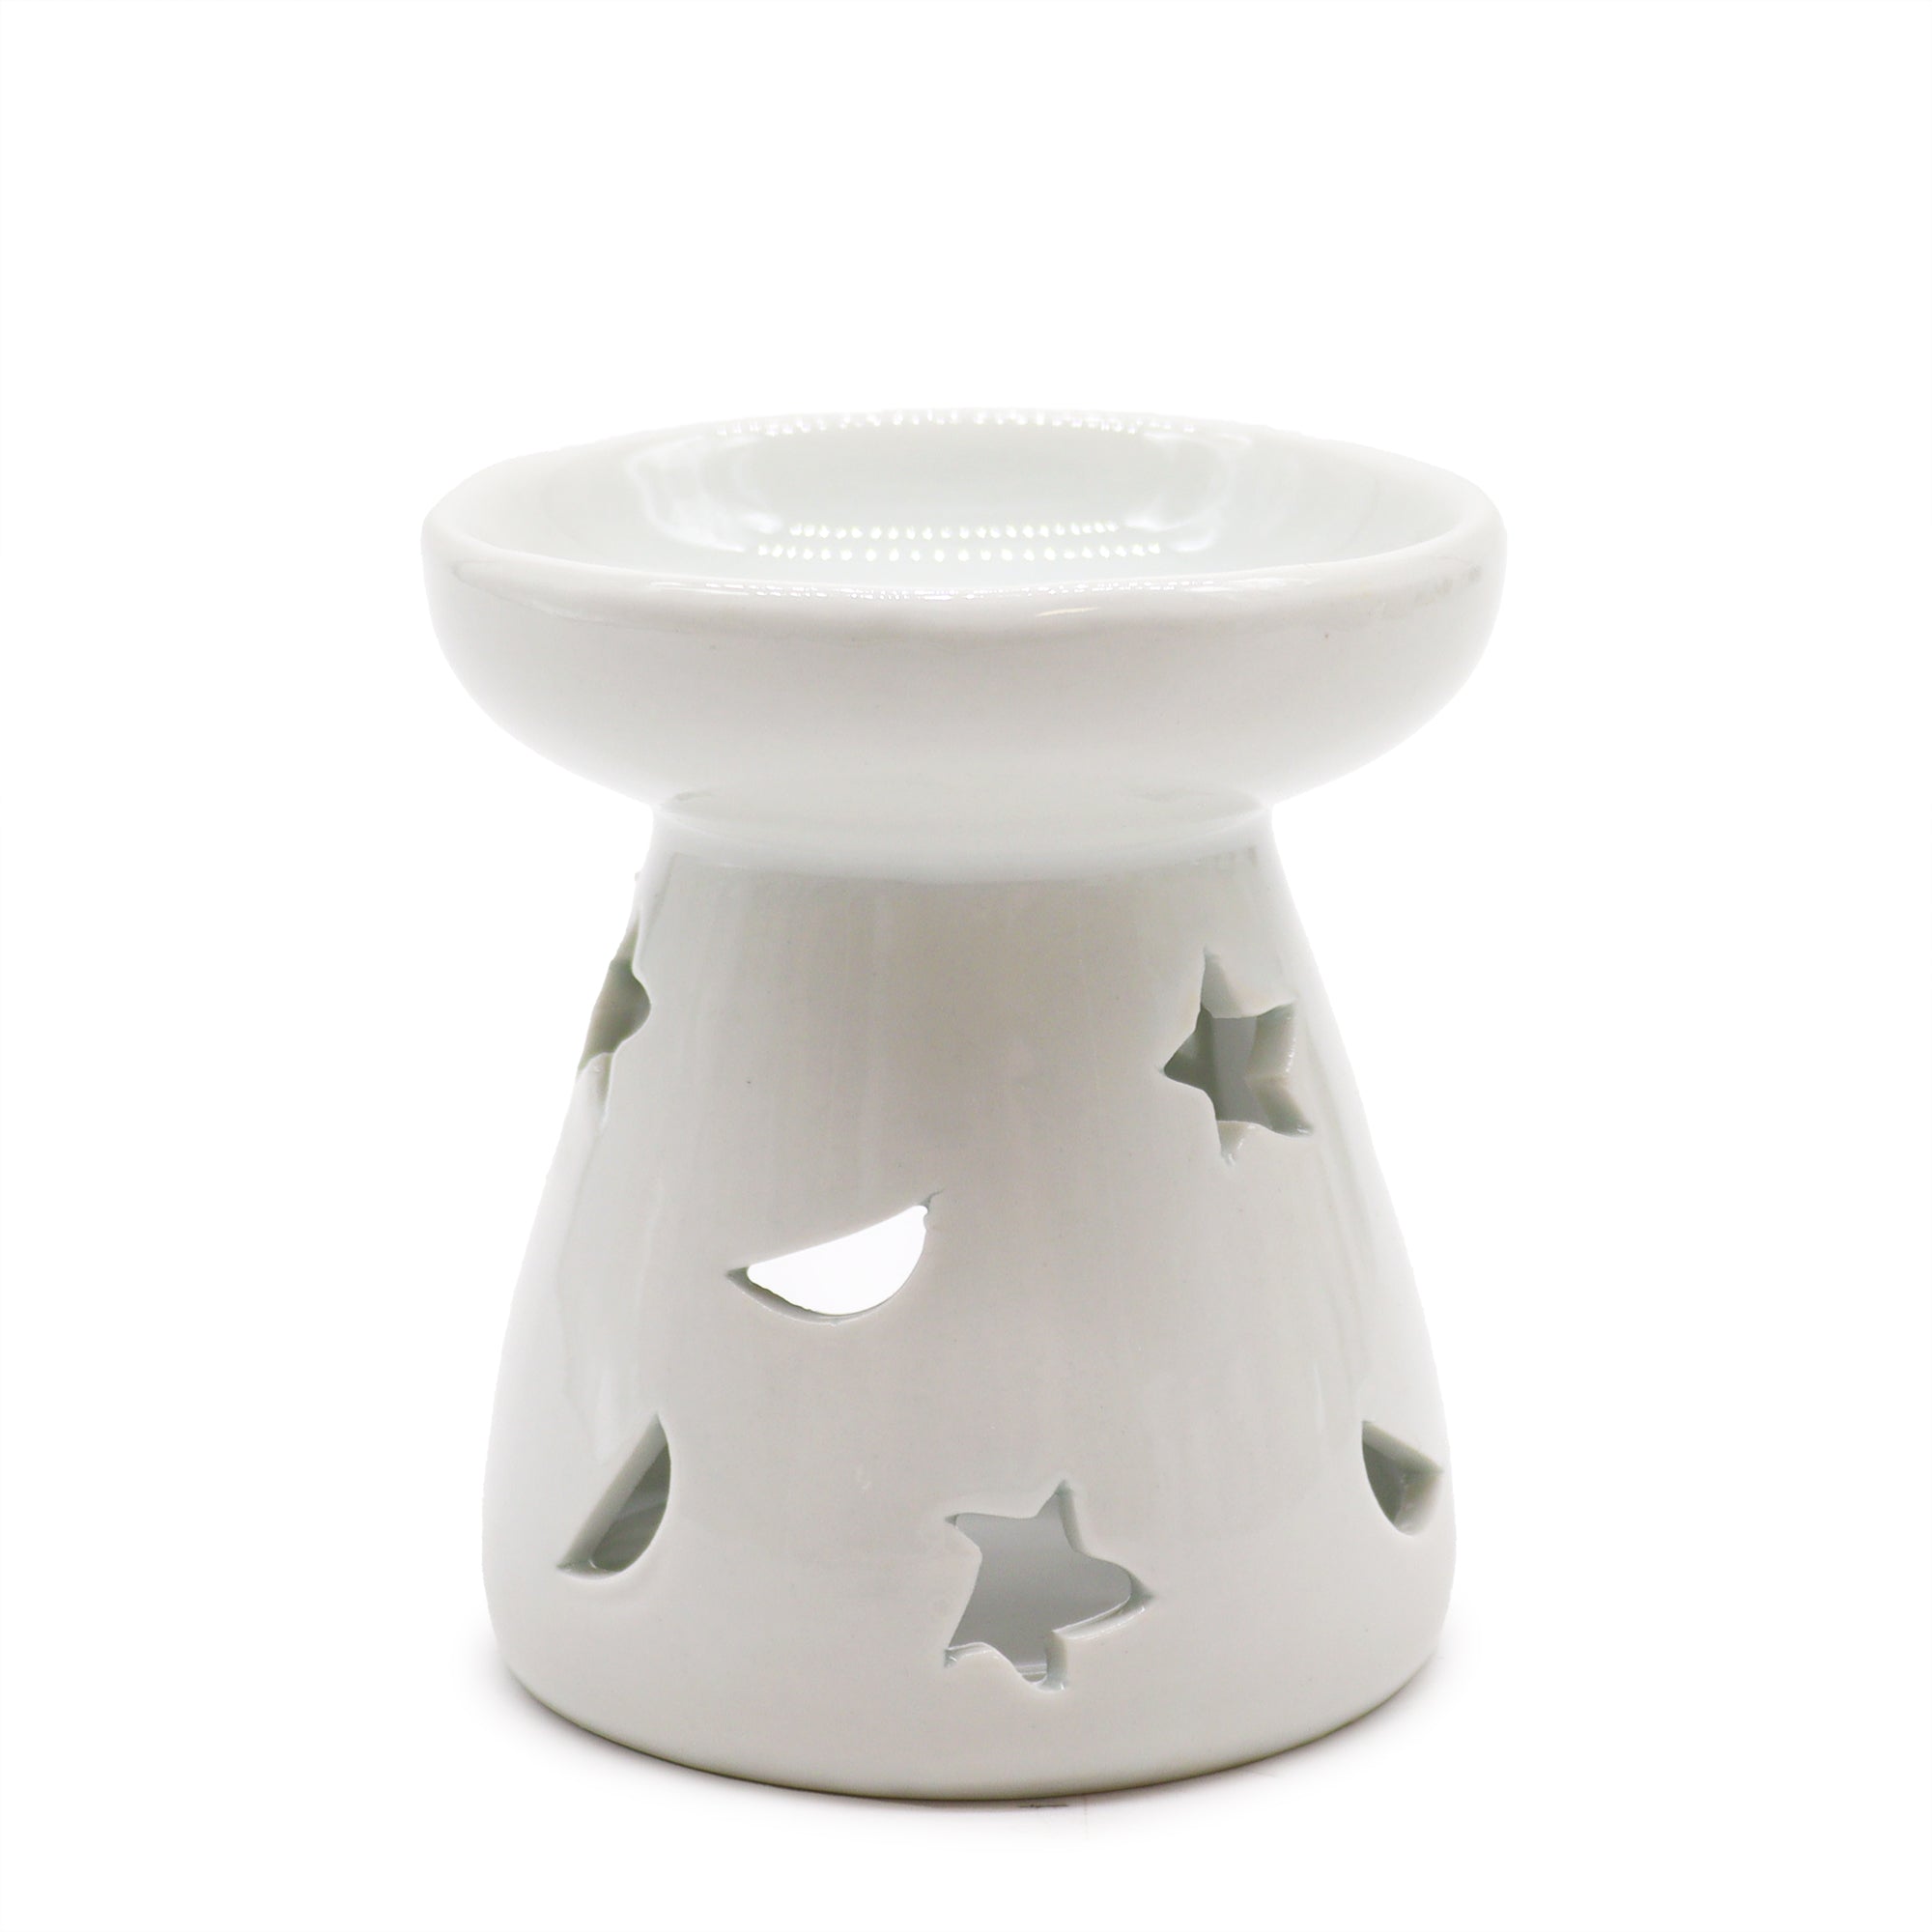 View Sm Classic White Oil Burner Moon Star information